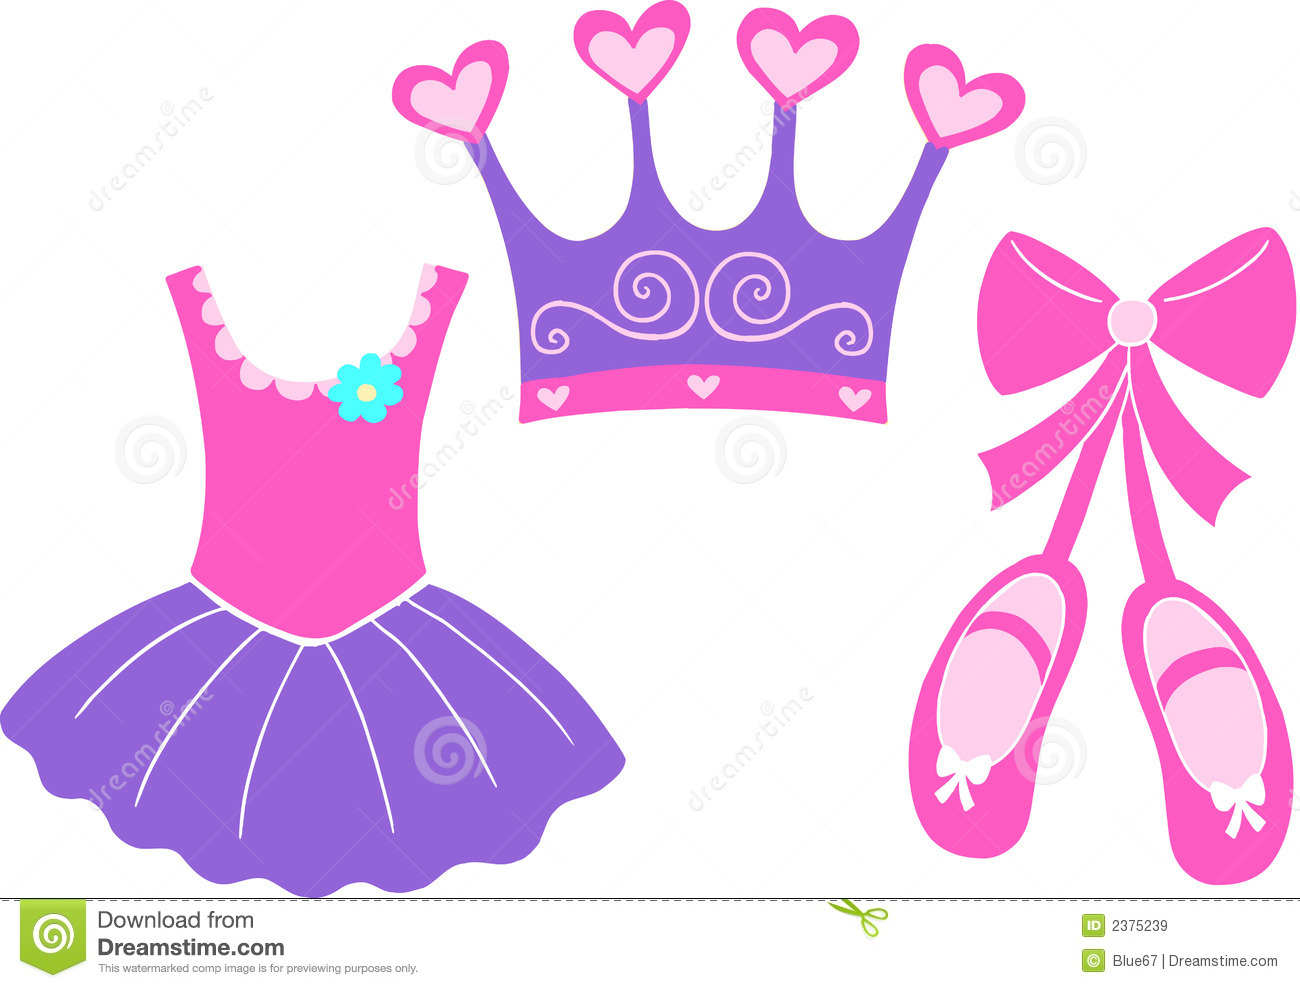 Sweet Tutus and Ties- Clipart